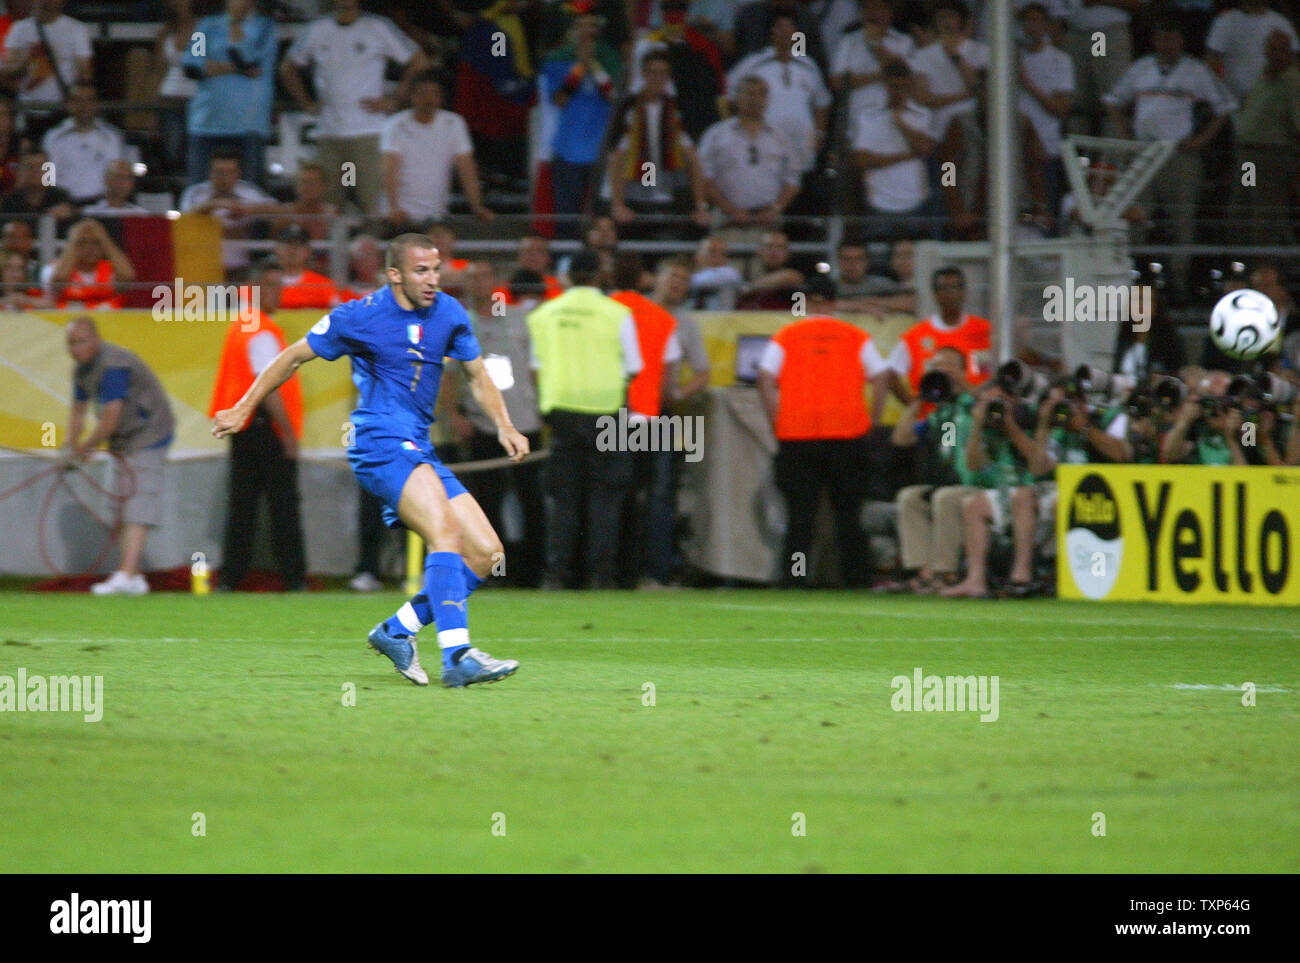 Alessandro del Piero shoots at goal and makes the 0:2 lead for Italy during World Cup soccer in Dortmund, Germany on July 4, 2006.  Italy defeated Germany 2-0.   (UPI Photo/Arthur Thill) Stock Photo